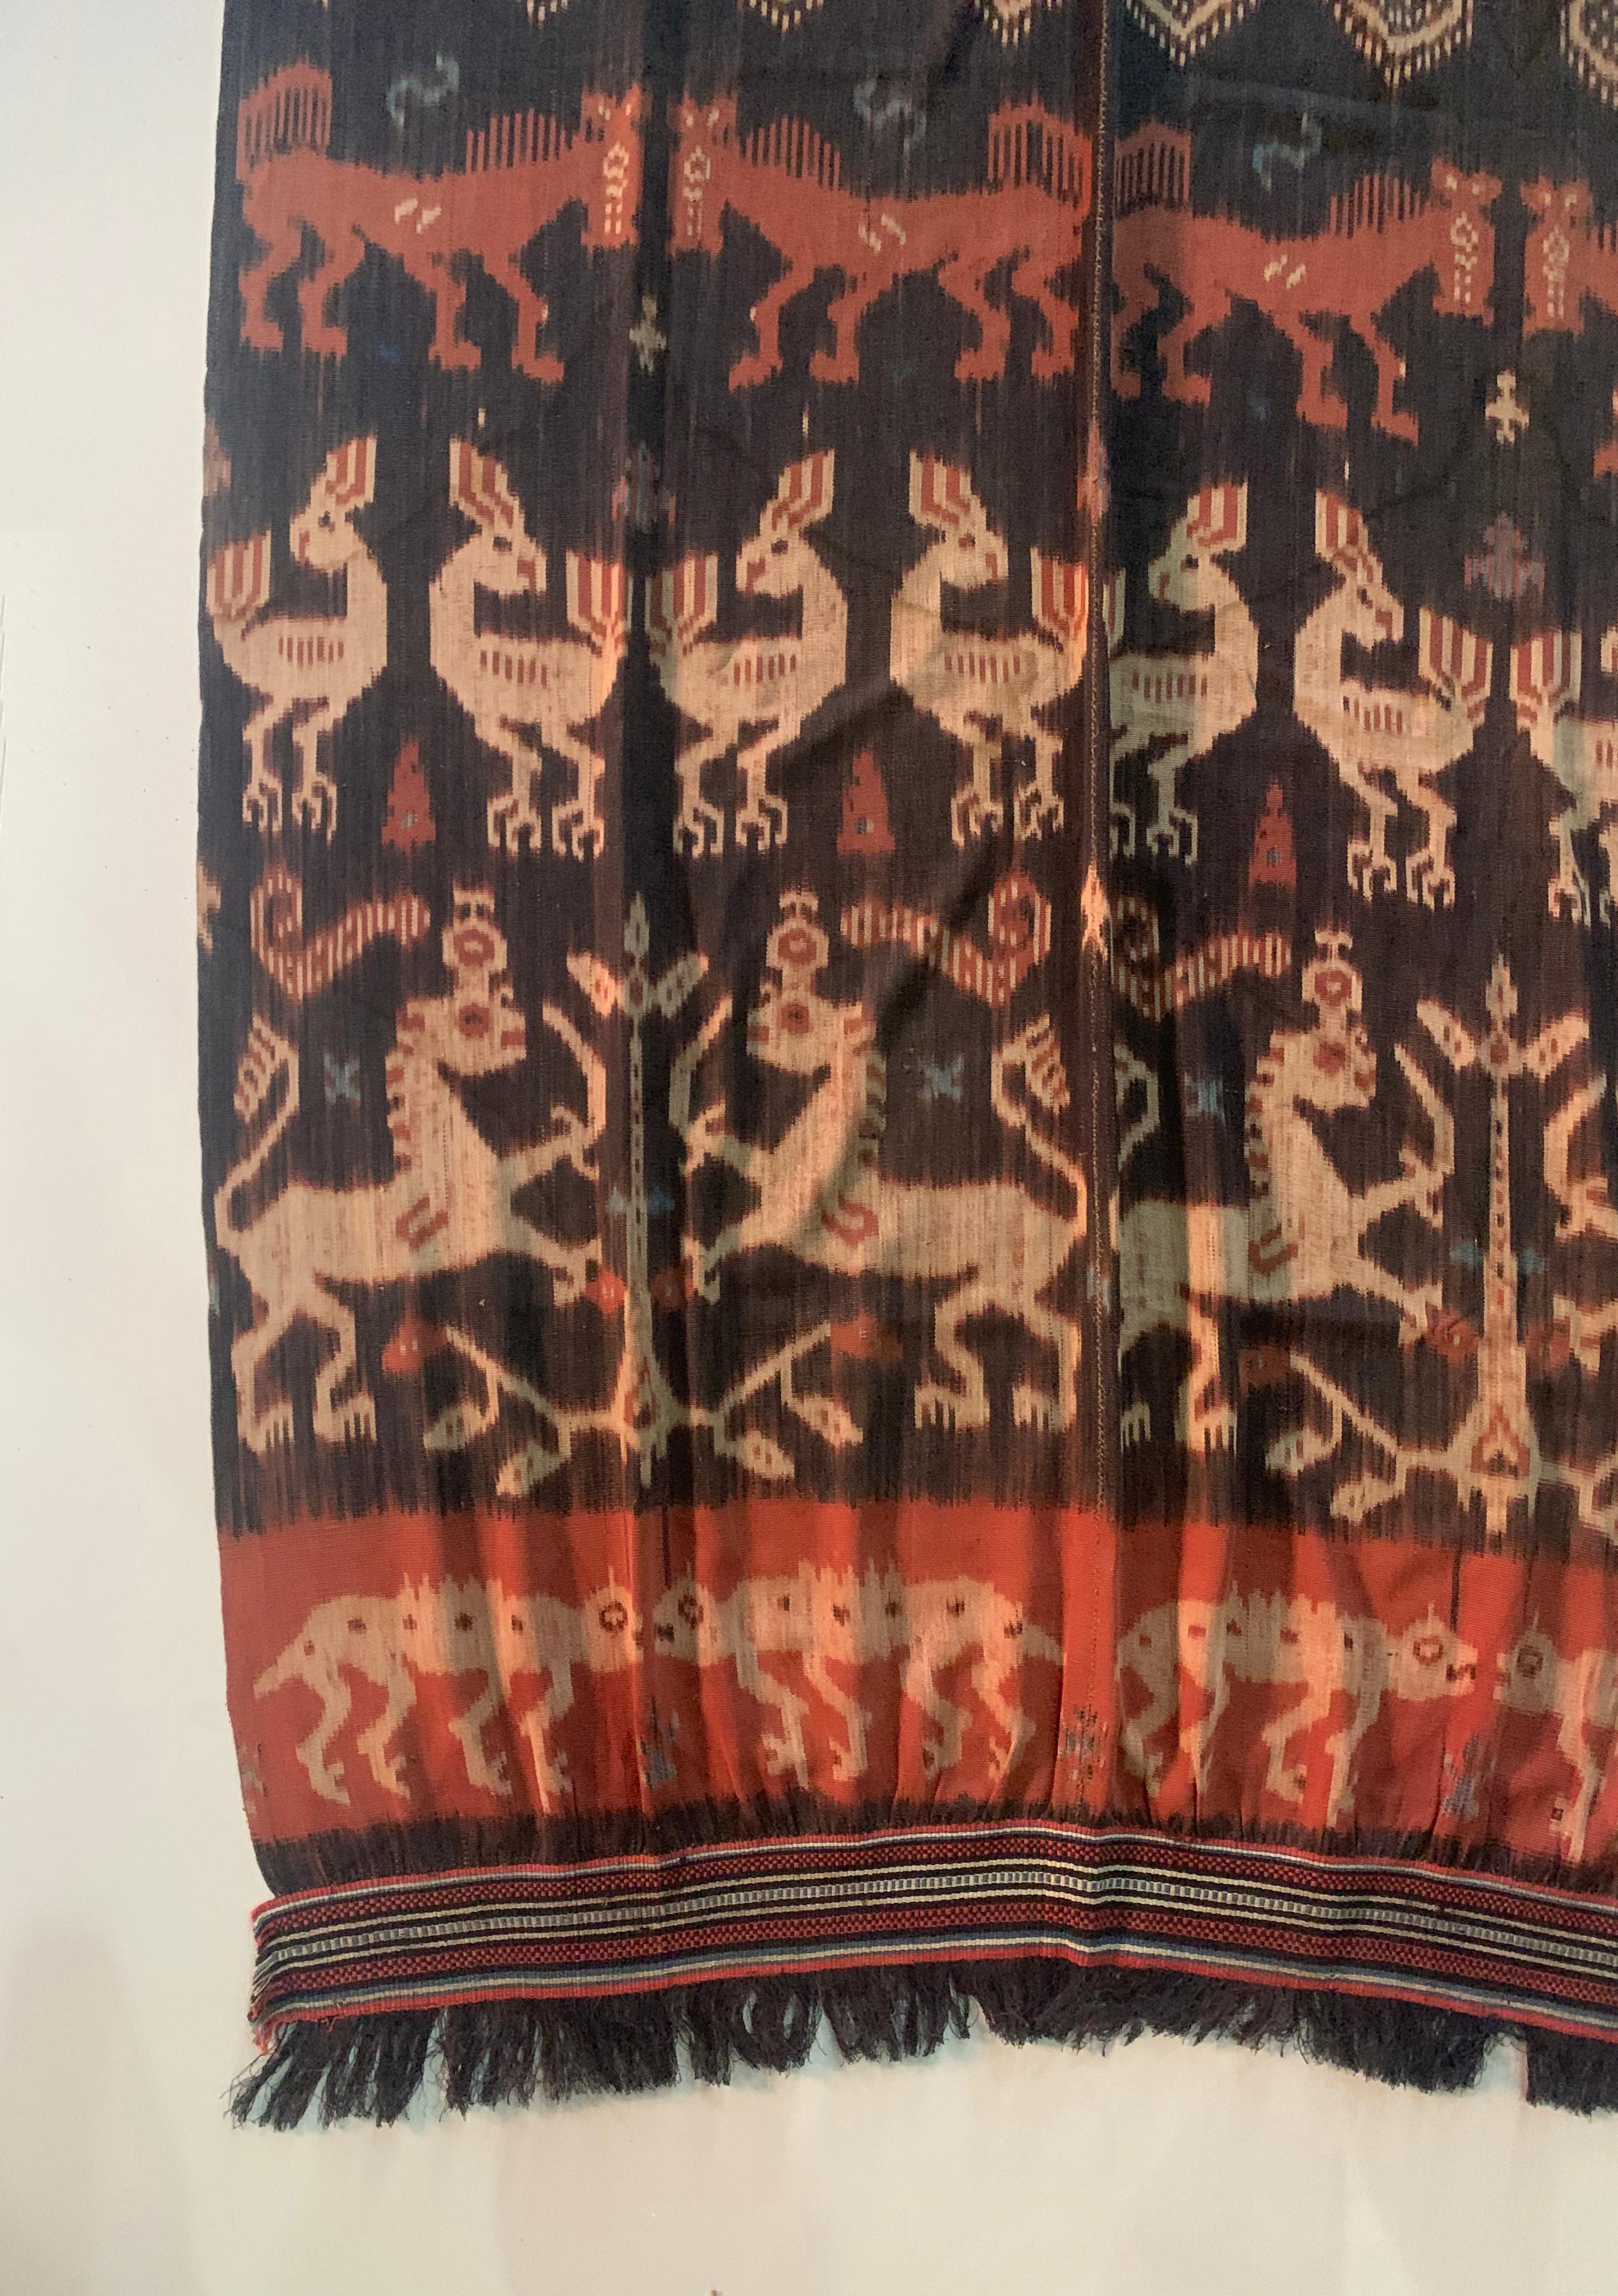 This Ikat textile originates from the Island of Sumba, Indonesia. It is hand-woven using naturally dyed yarns via a method passed on through generations. It features a stunning array of distinct tribal patterns as well as chicken, horse, and reptile